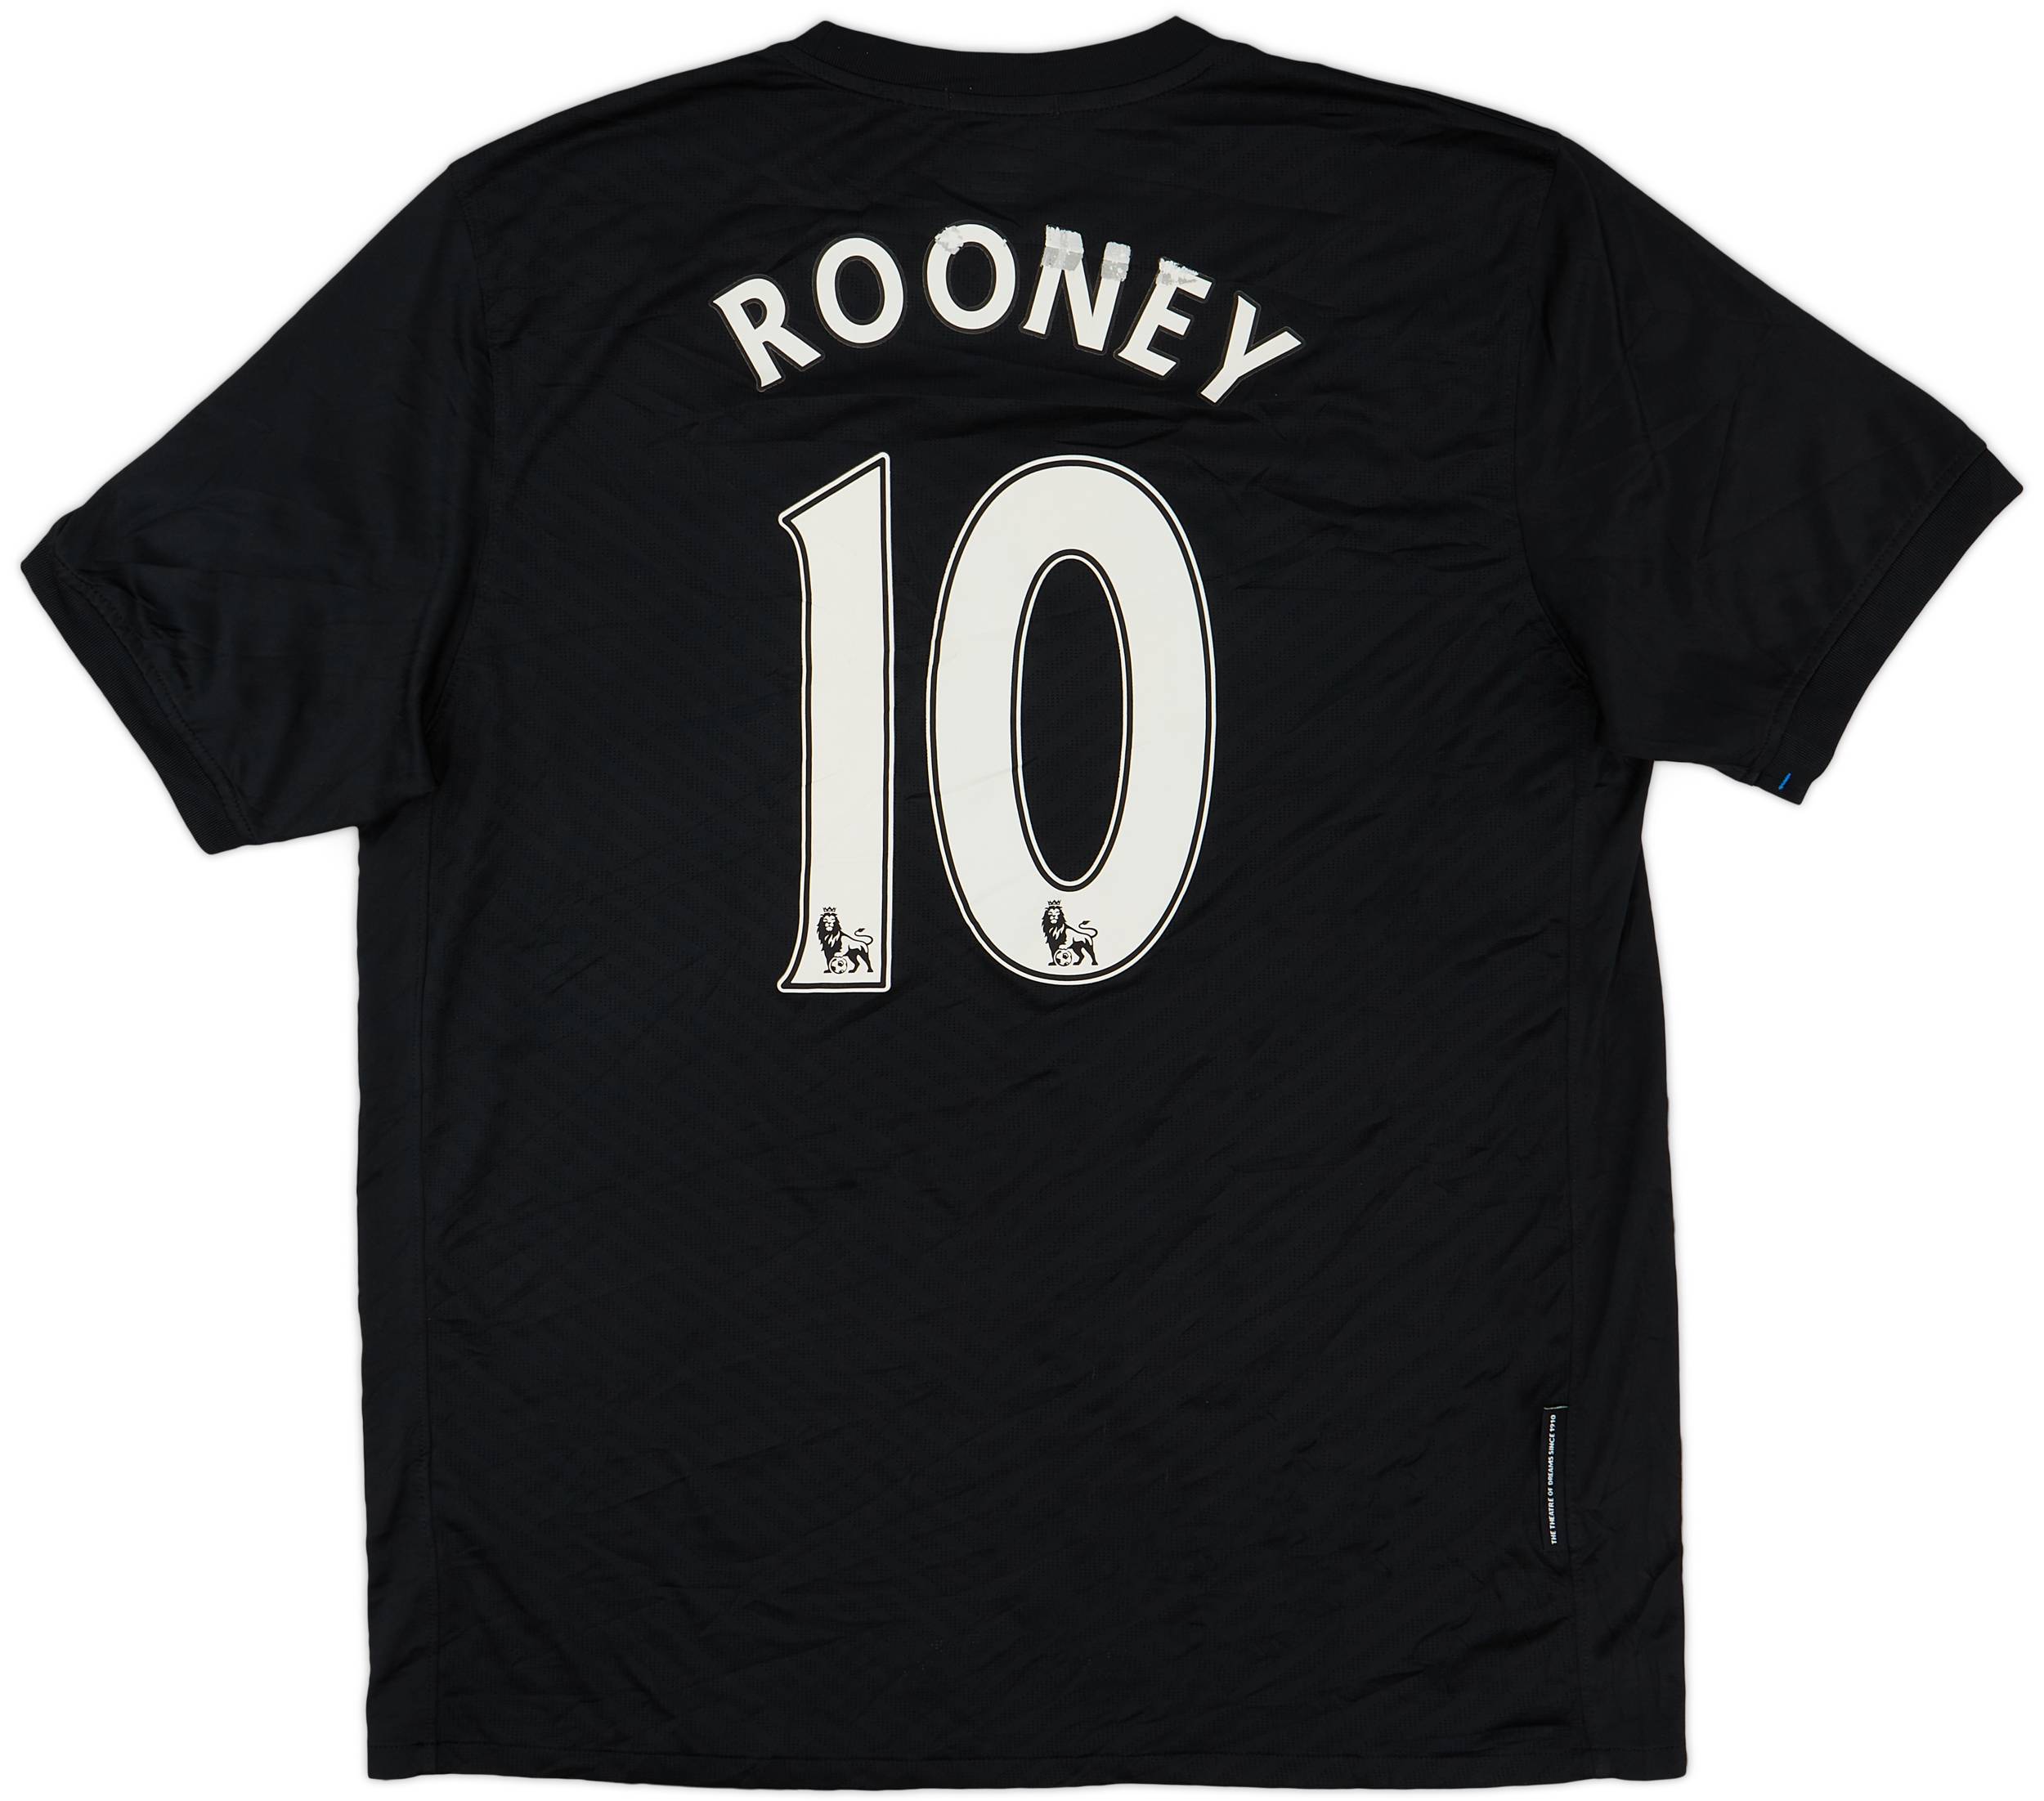 2009-10 Manchester United Away Shirt Rooney #10 - 5/10 - (L)